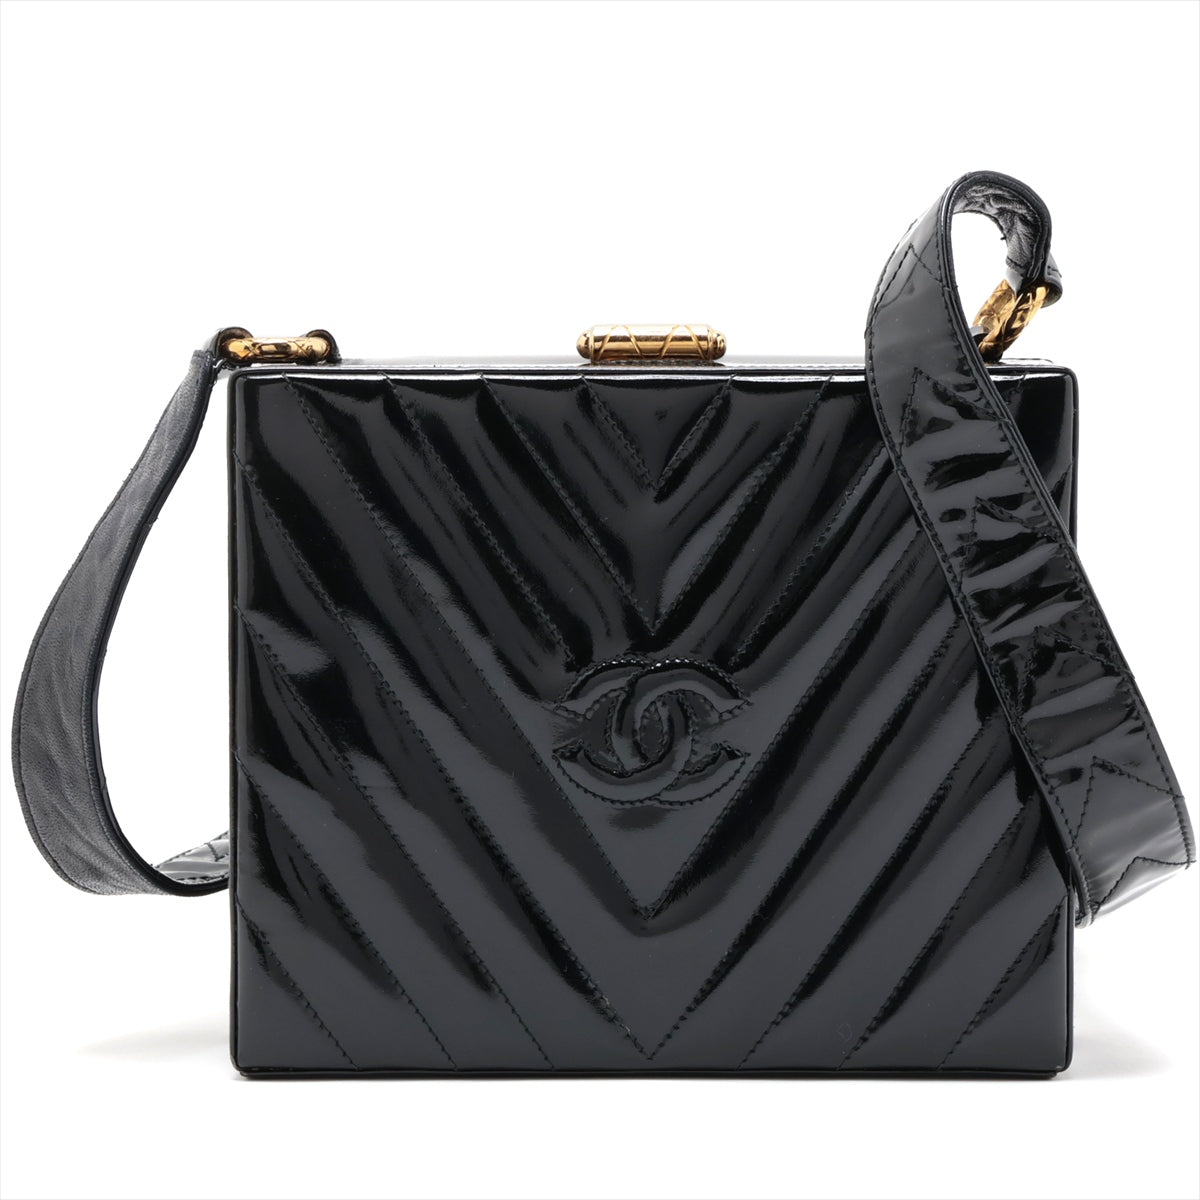 Chanel V Stitch Patent Leather Shoulder Bag Coco Black G Gold  Holding Gold Tools and Other Speech